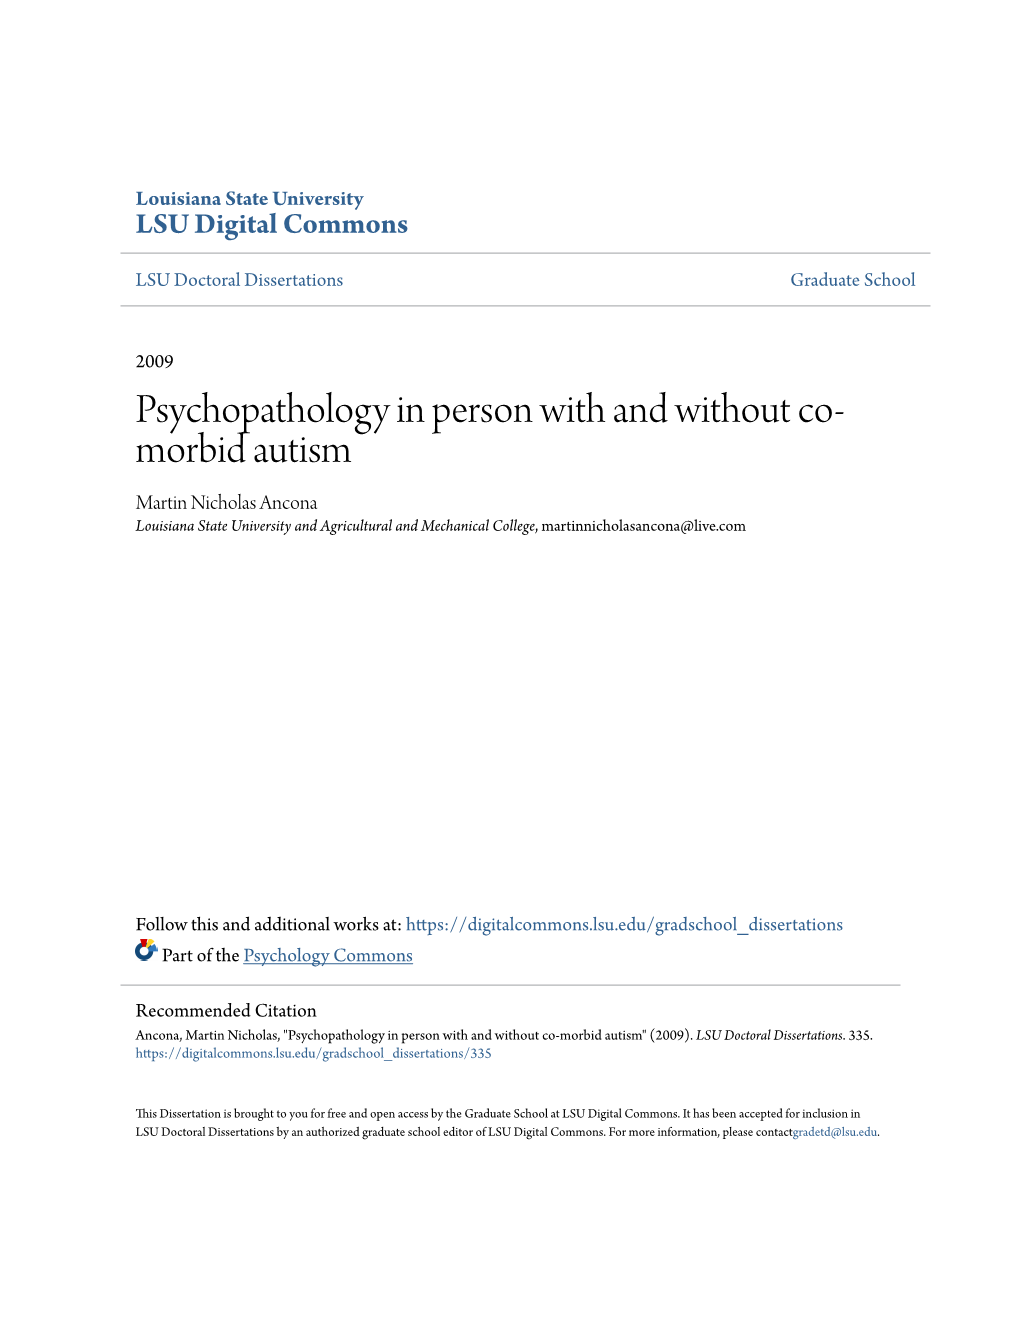 Psychopathology in Person with and Without Co-Morbid Autism" (2009)